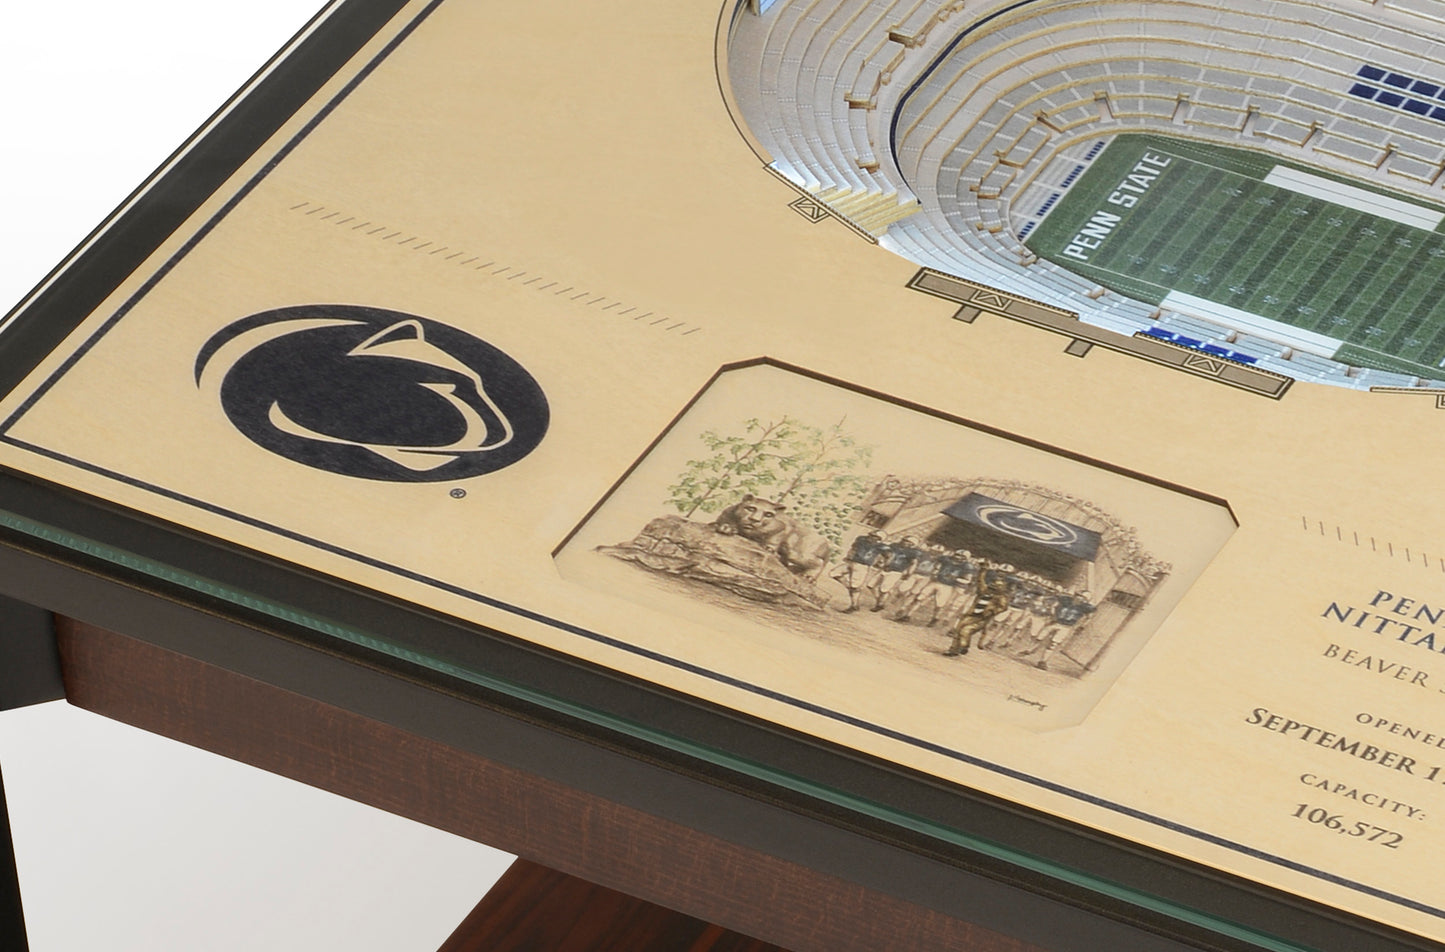 PENN STATE NITTANY LIONS 25 LAYER 3D STADIUM LIGHTED END TABLE